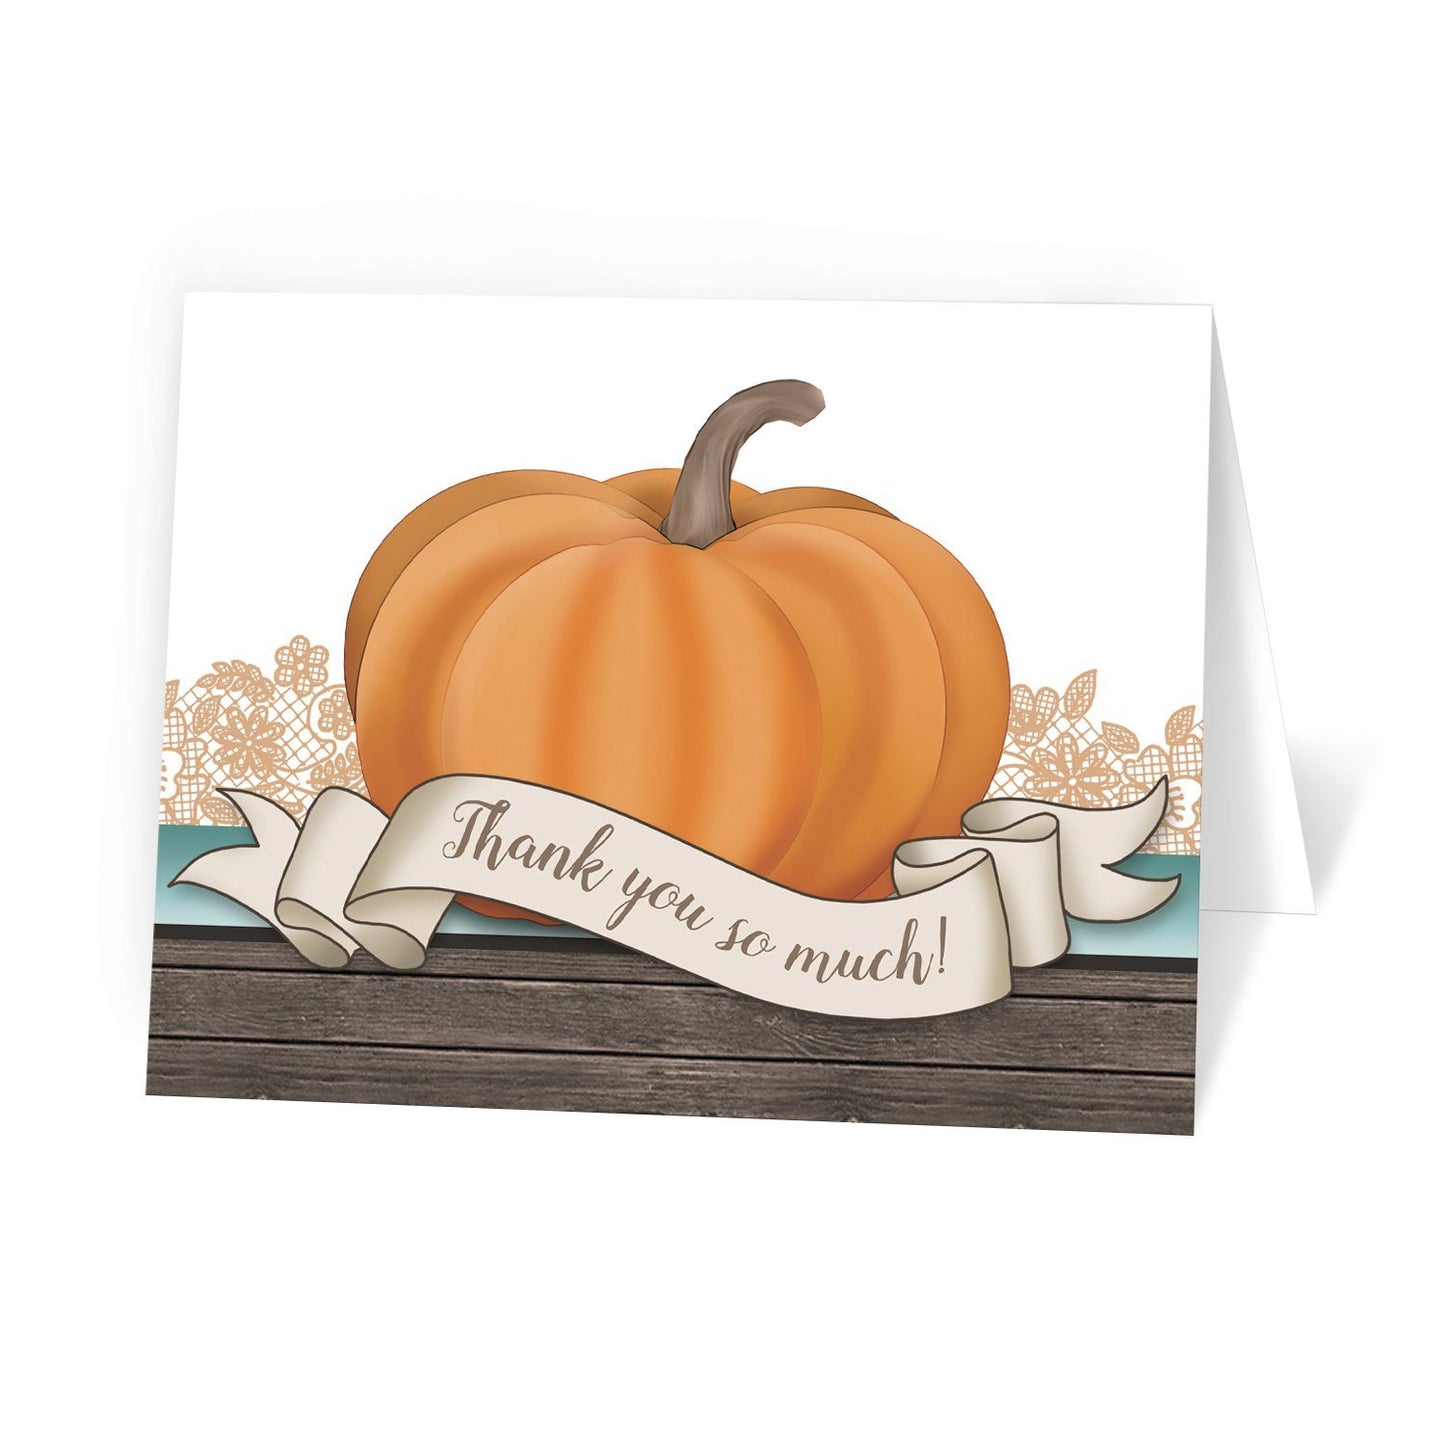 Rustic Orange Teal Pumpkin Thank You Cards at Artistically Invited